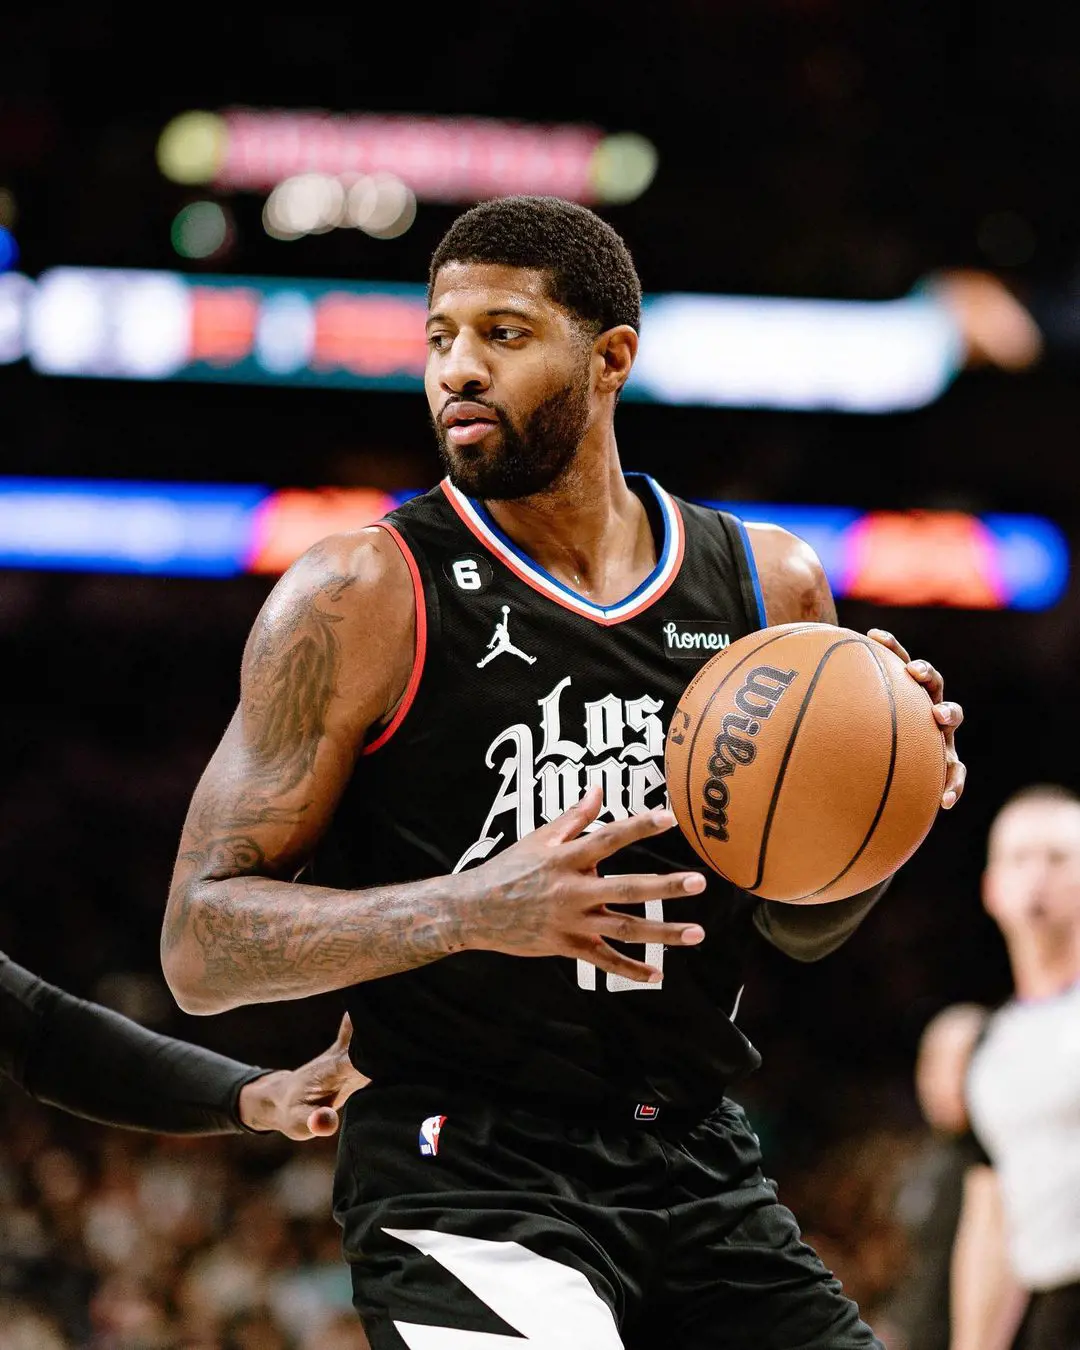 Los Angeles Clippers power forward Paul George against the Dallas Mavericks in the NBA game on Jan 24